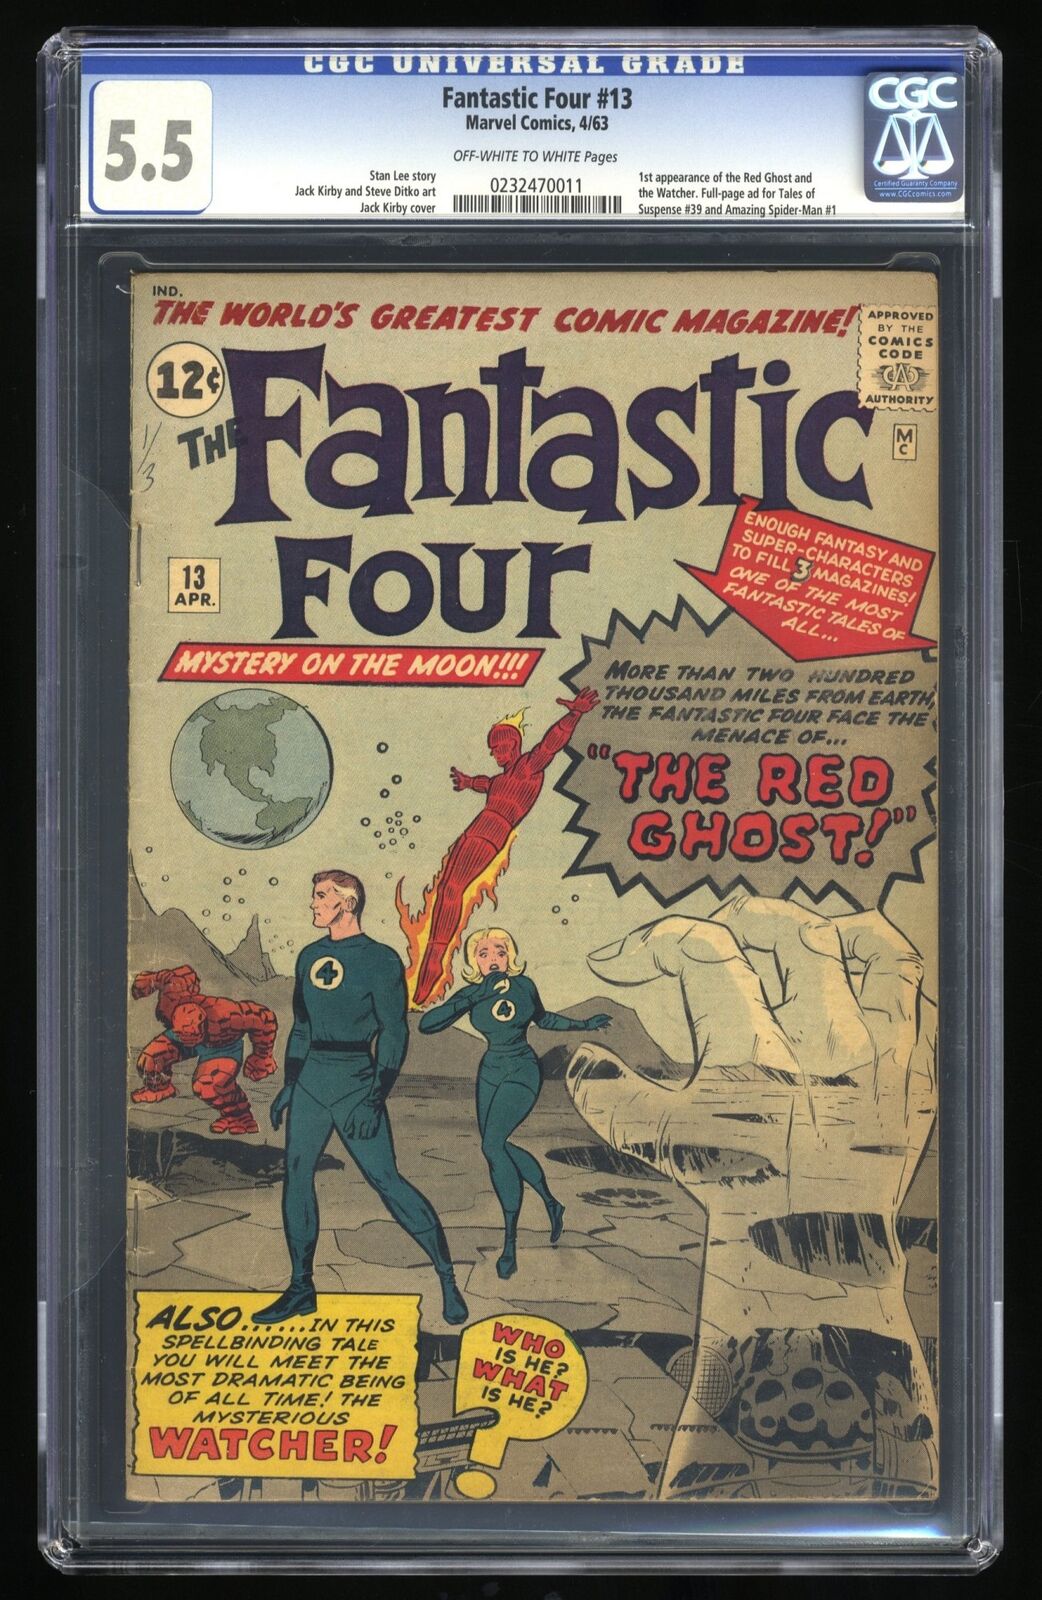 Fantastic Four #13 CGC FN- 5.5 1st Appearance Watcher and Red Ghost Marvel 1963